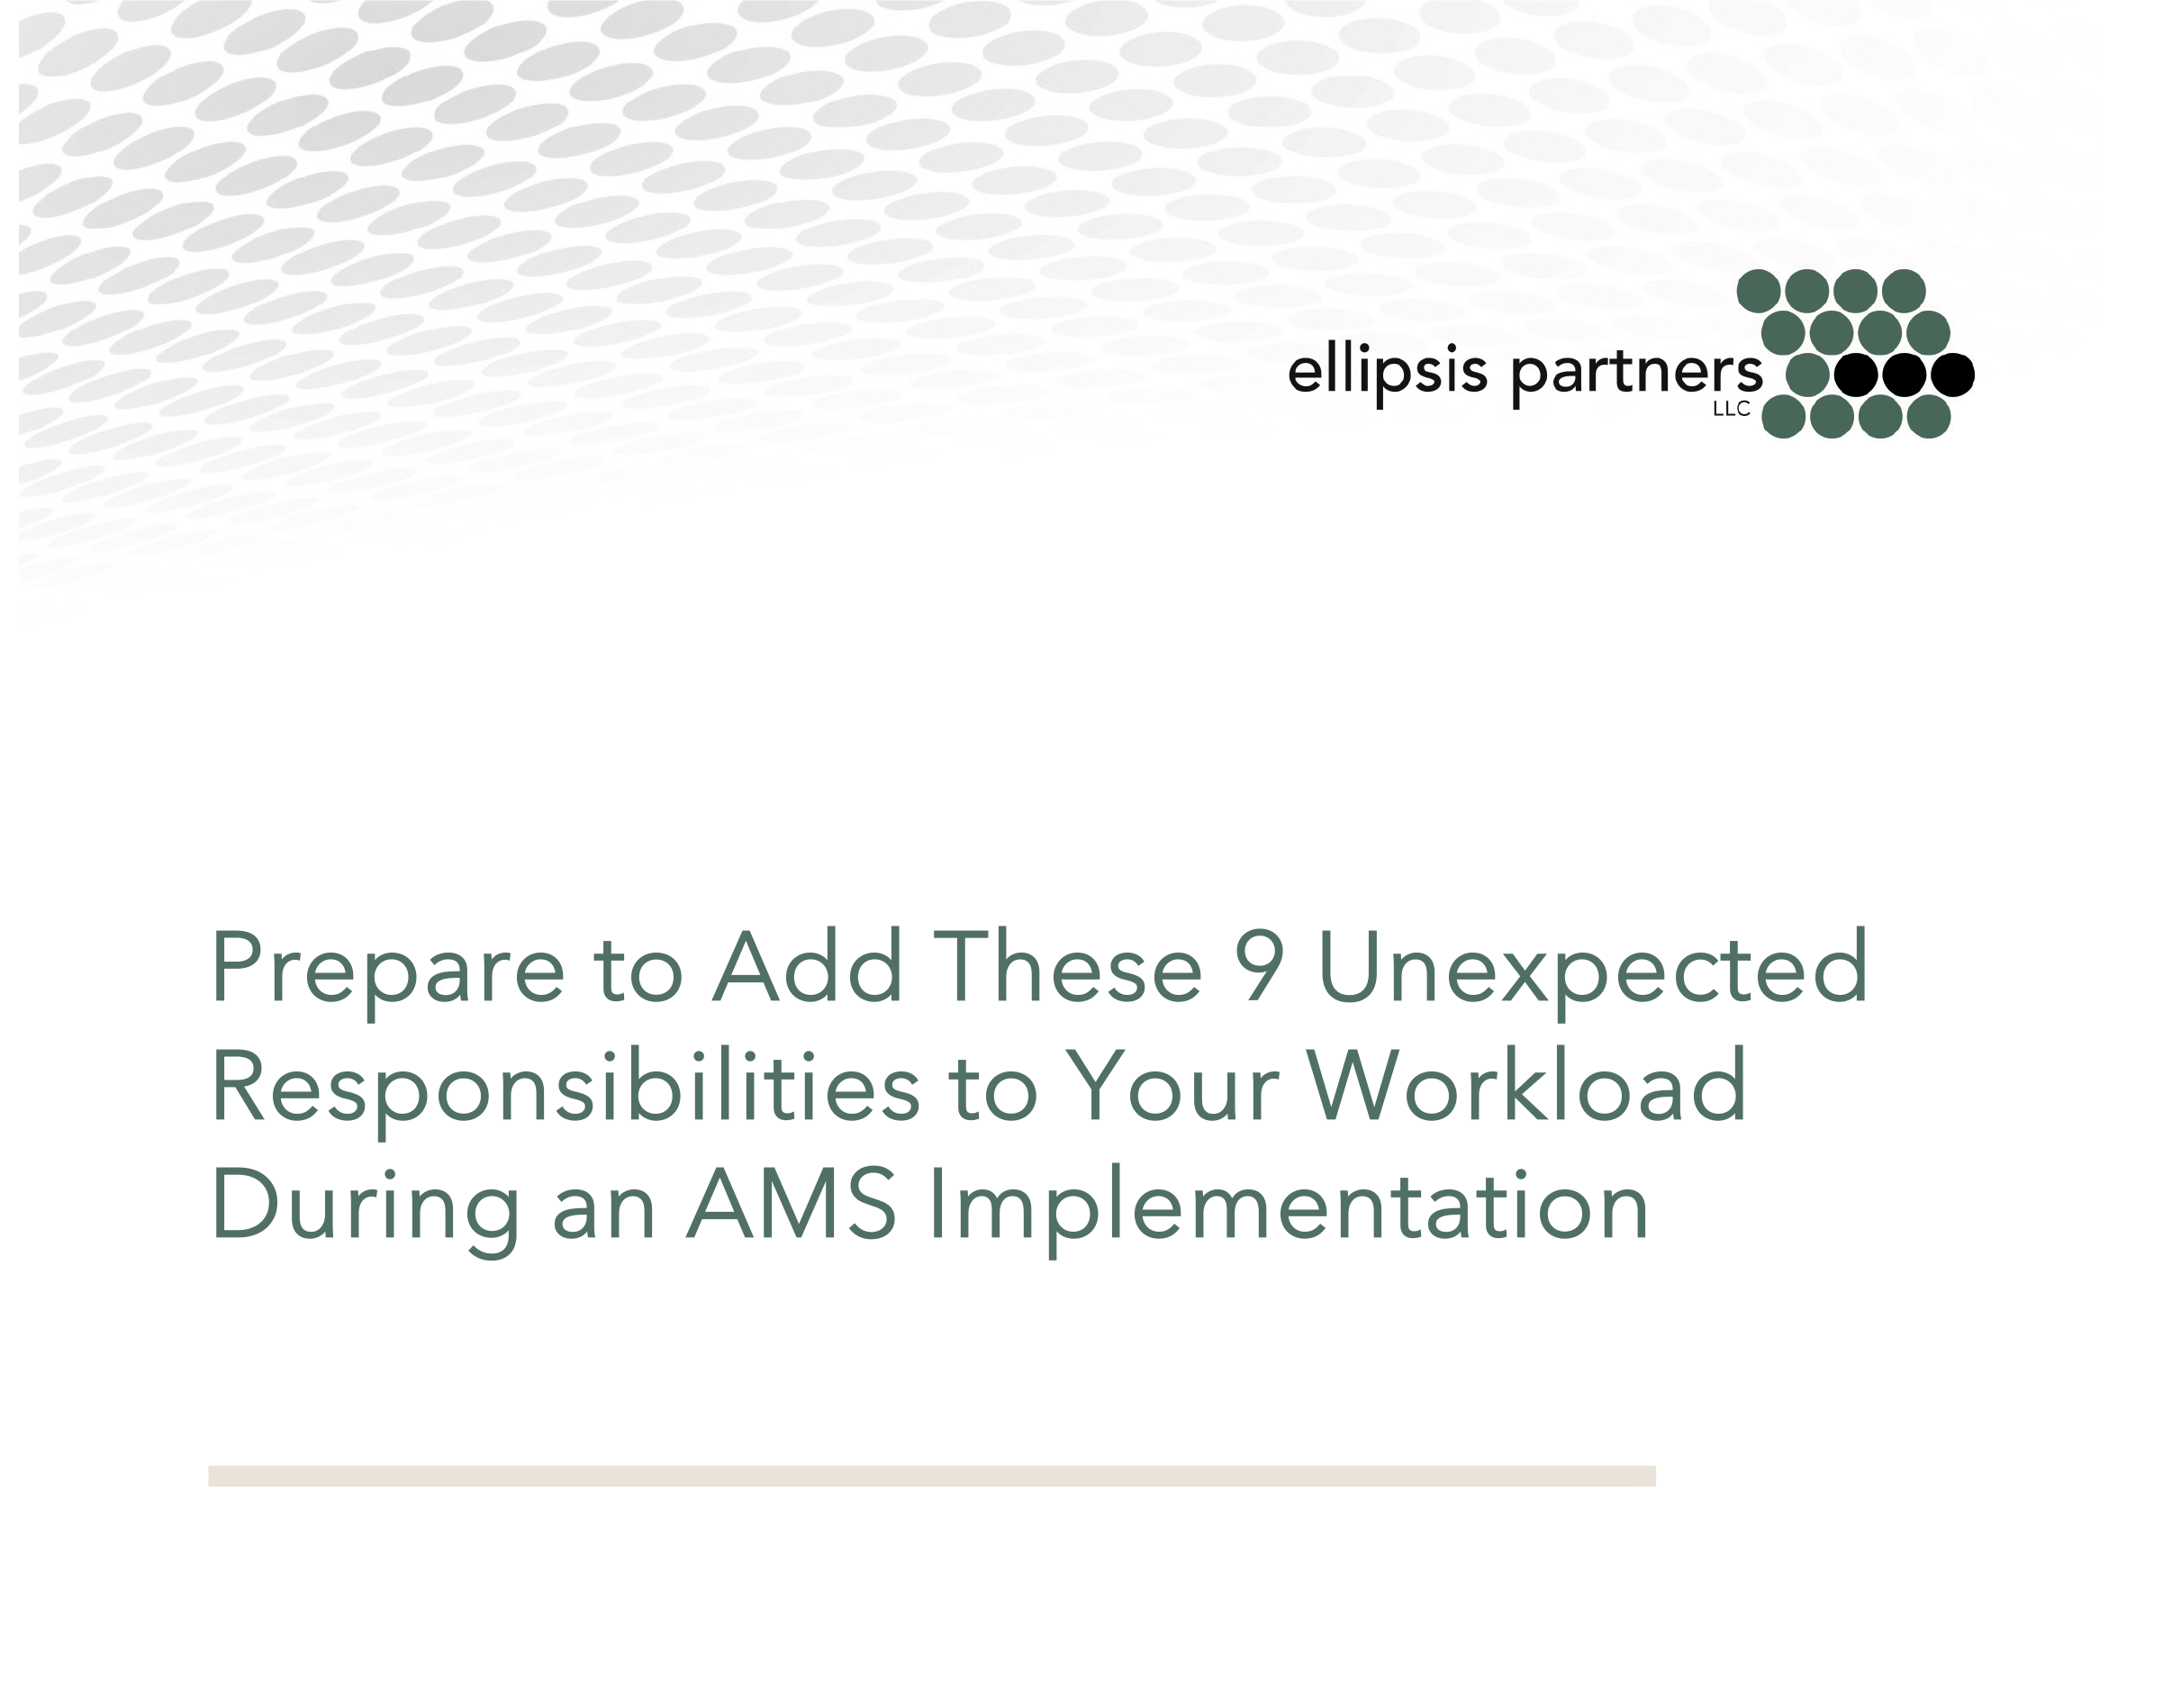 Prepare to Add These 9 Unexpected Responsibilities to Your Workload During an AMS Implementation Cover Page